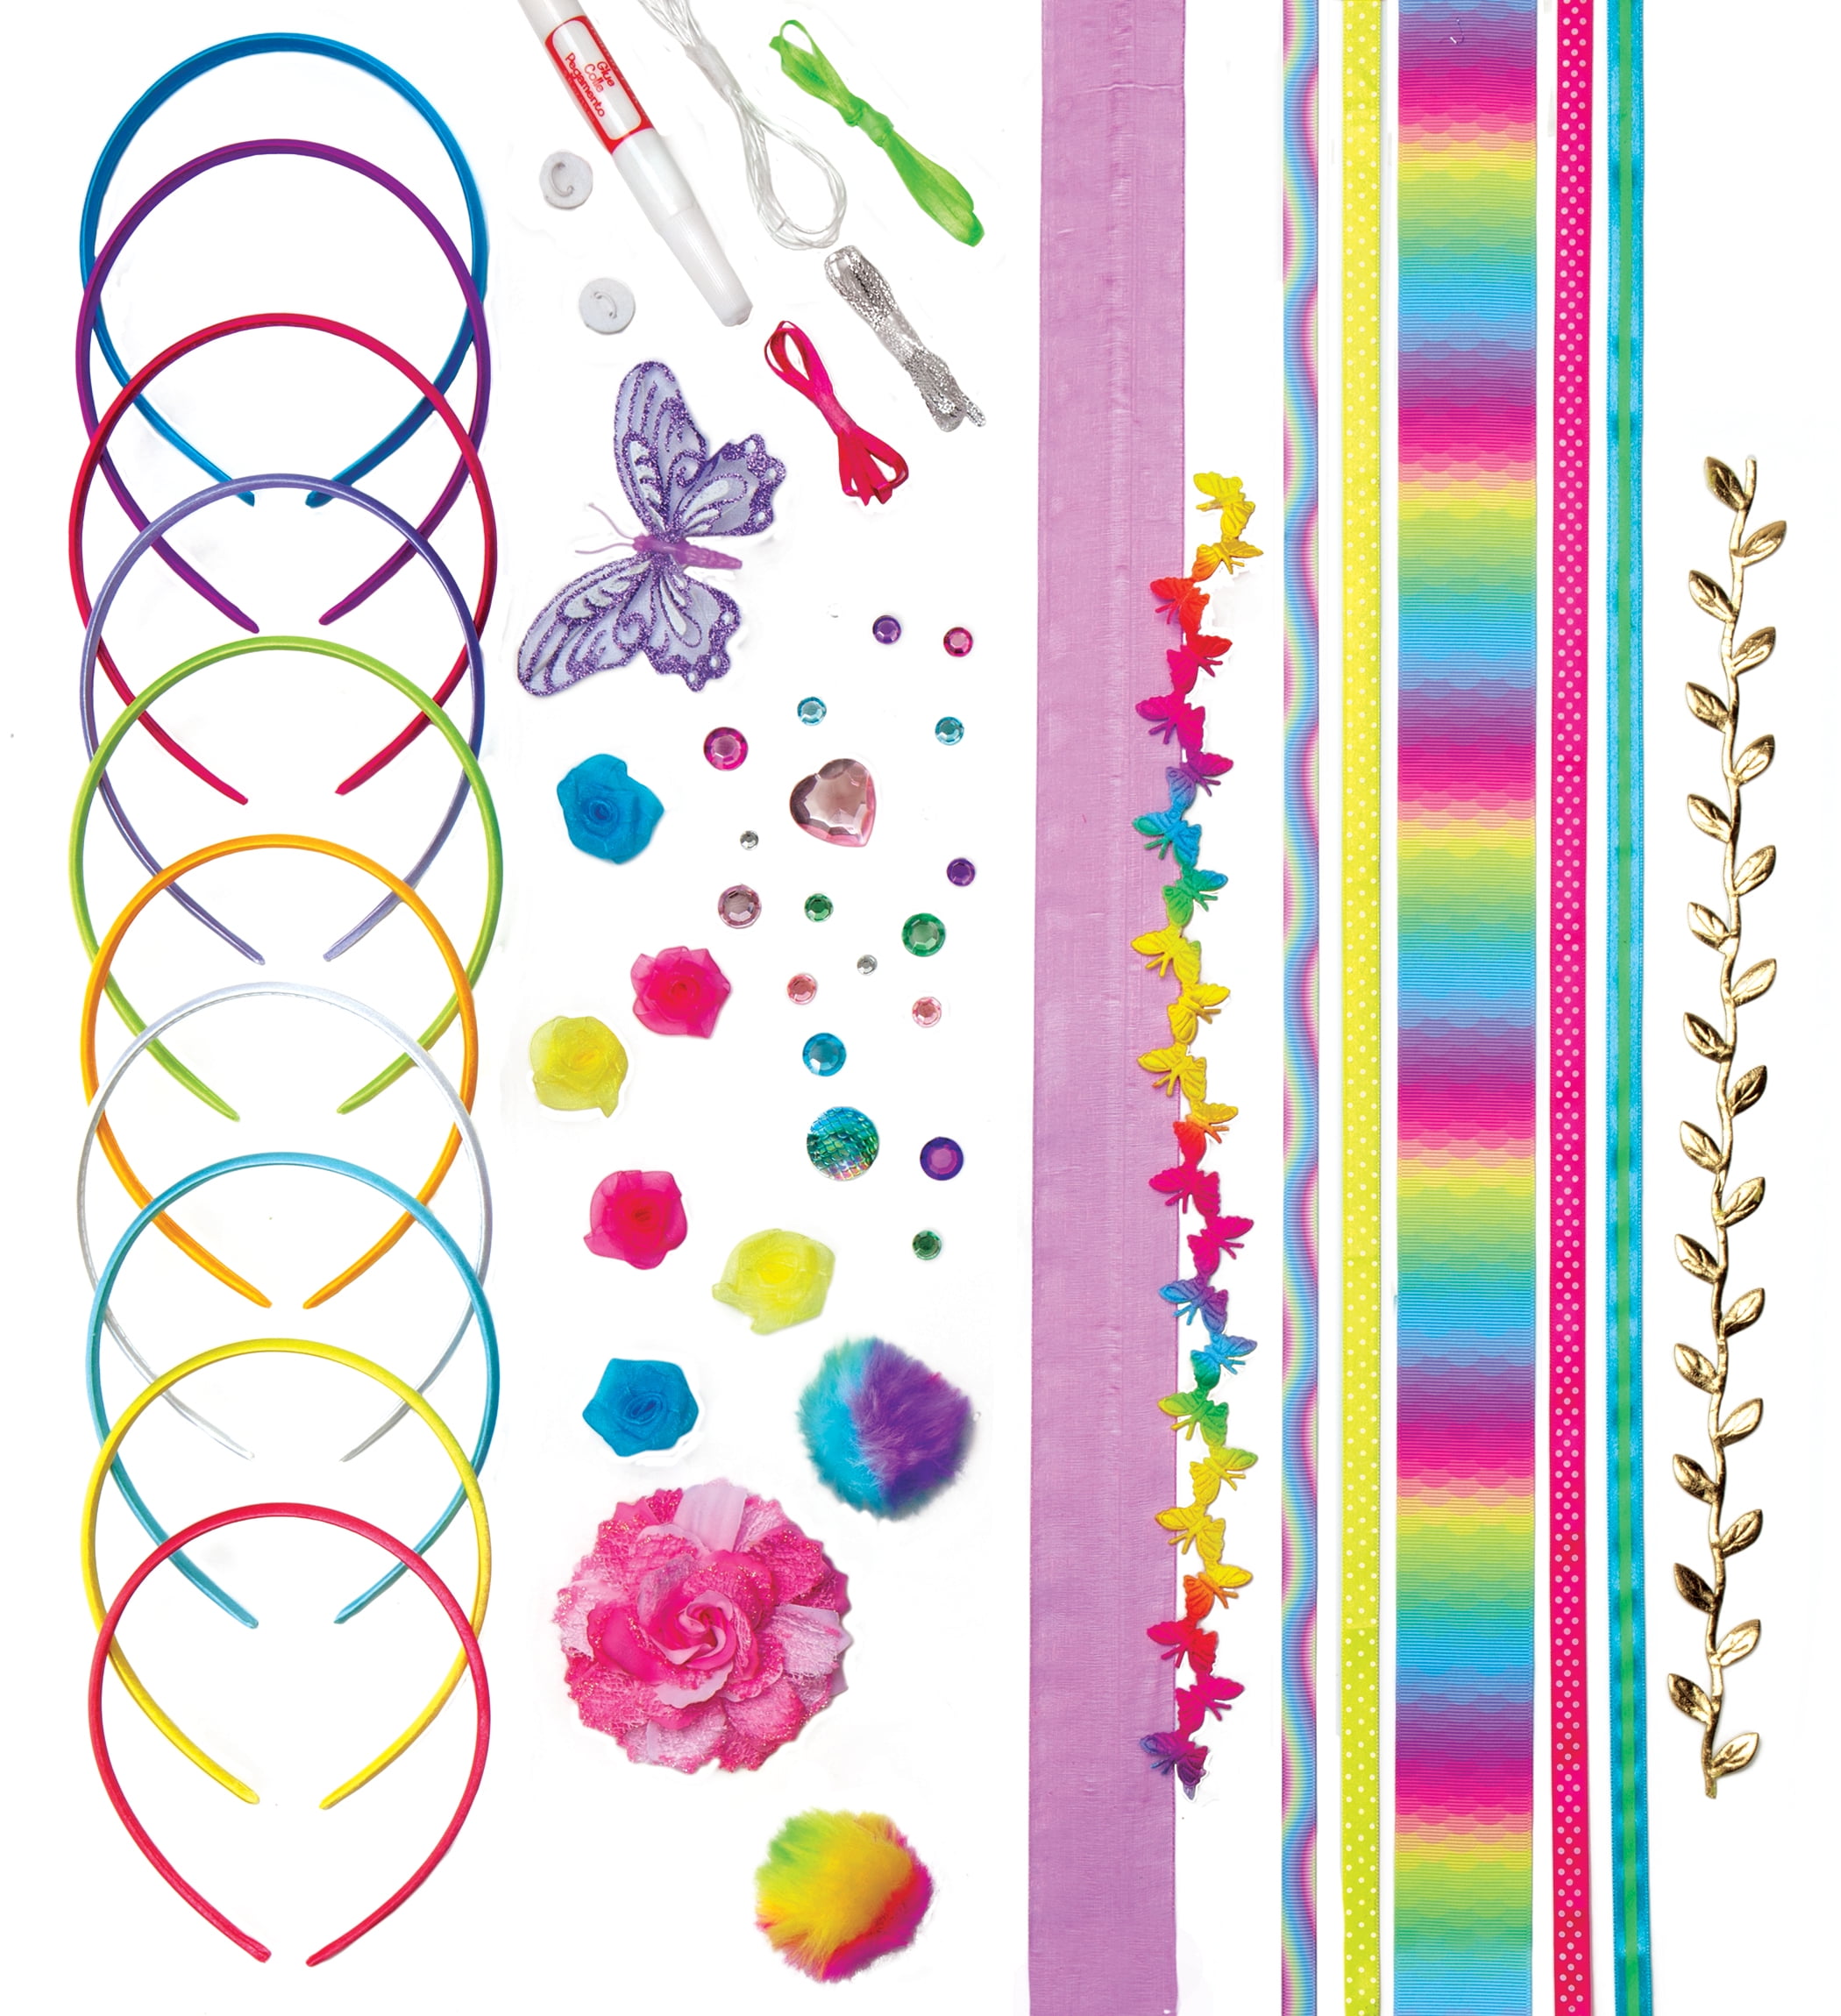  MDCGFOD Arts and Crafts for Girls, DIY Headband Making Kit-  Make Your Own Fashion Hair Accessories, Arts & Crafts Kit for Ages 5 6 7 8  9 10 11 12 Year